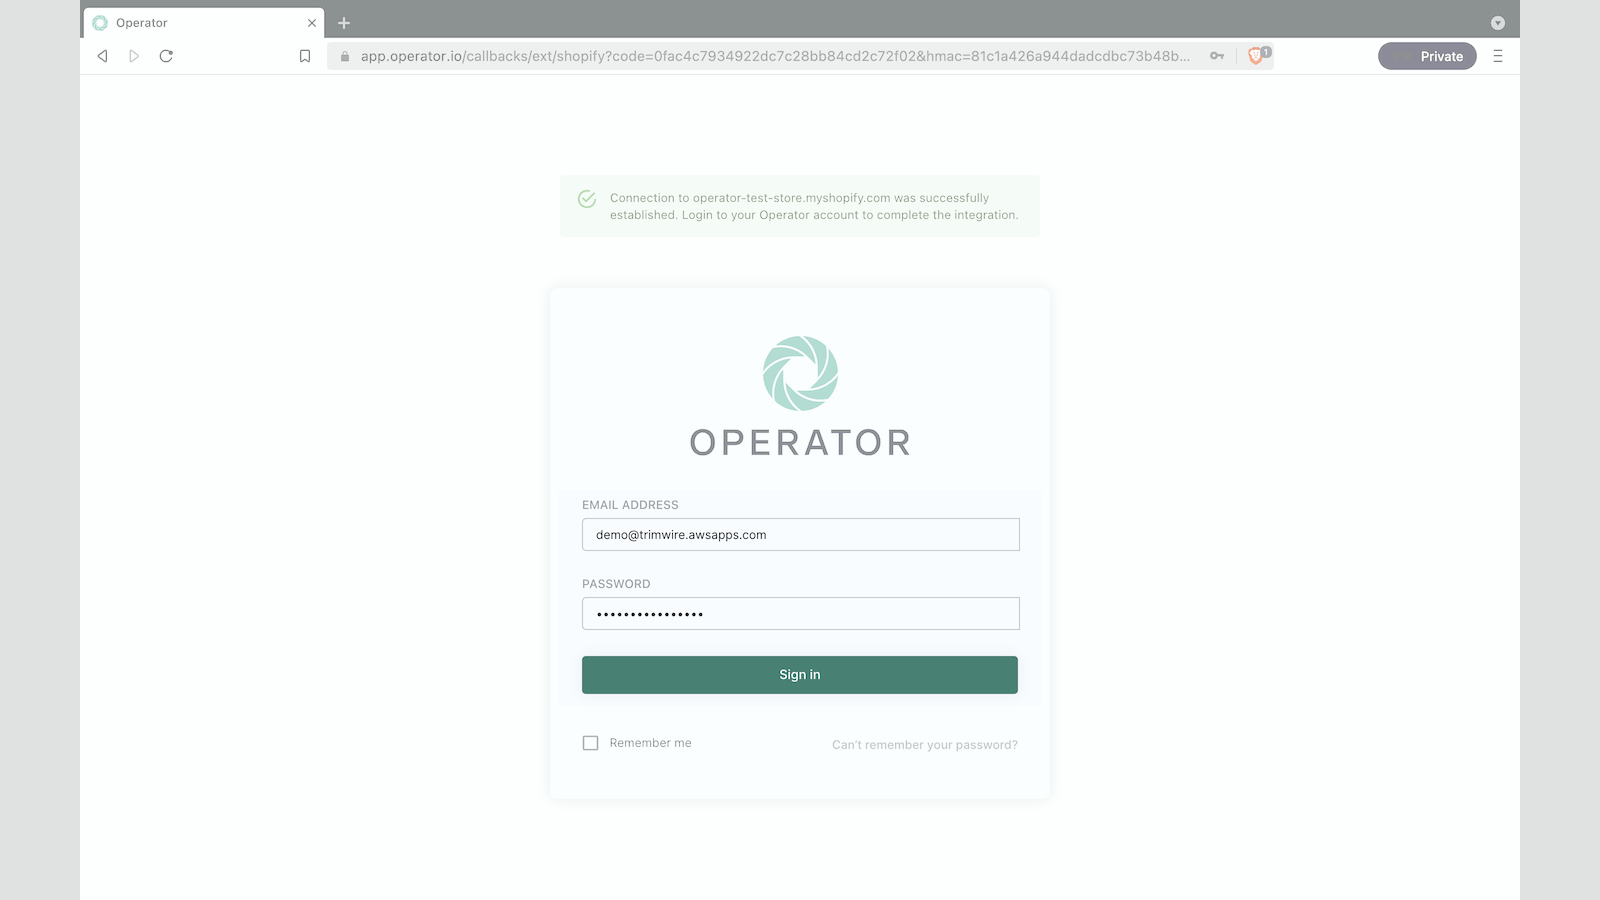 Next, log into your Operator account to connect your store. 